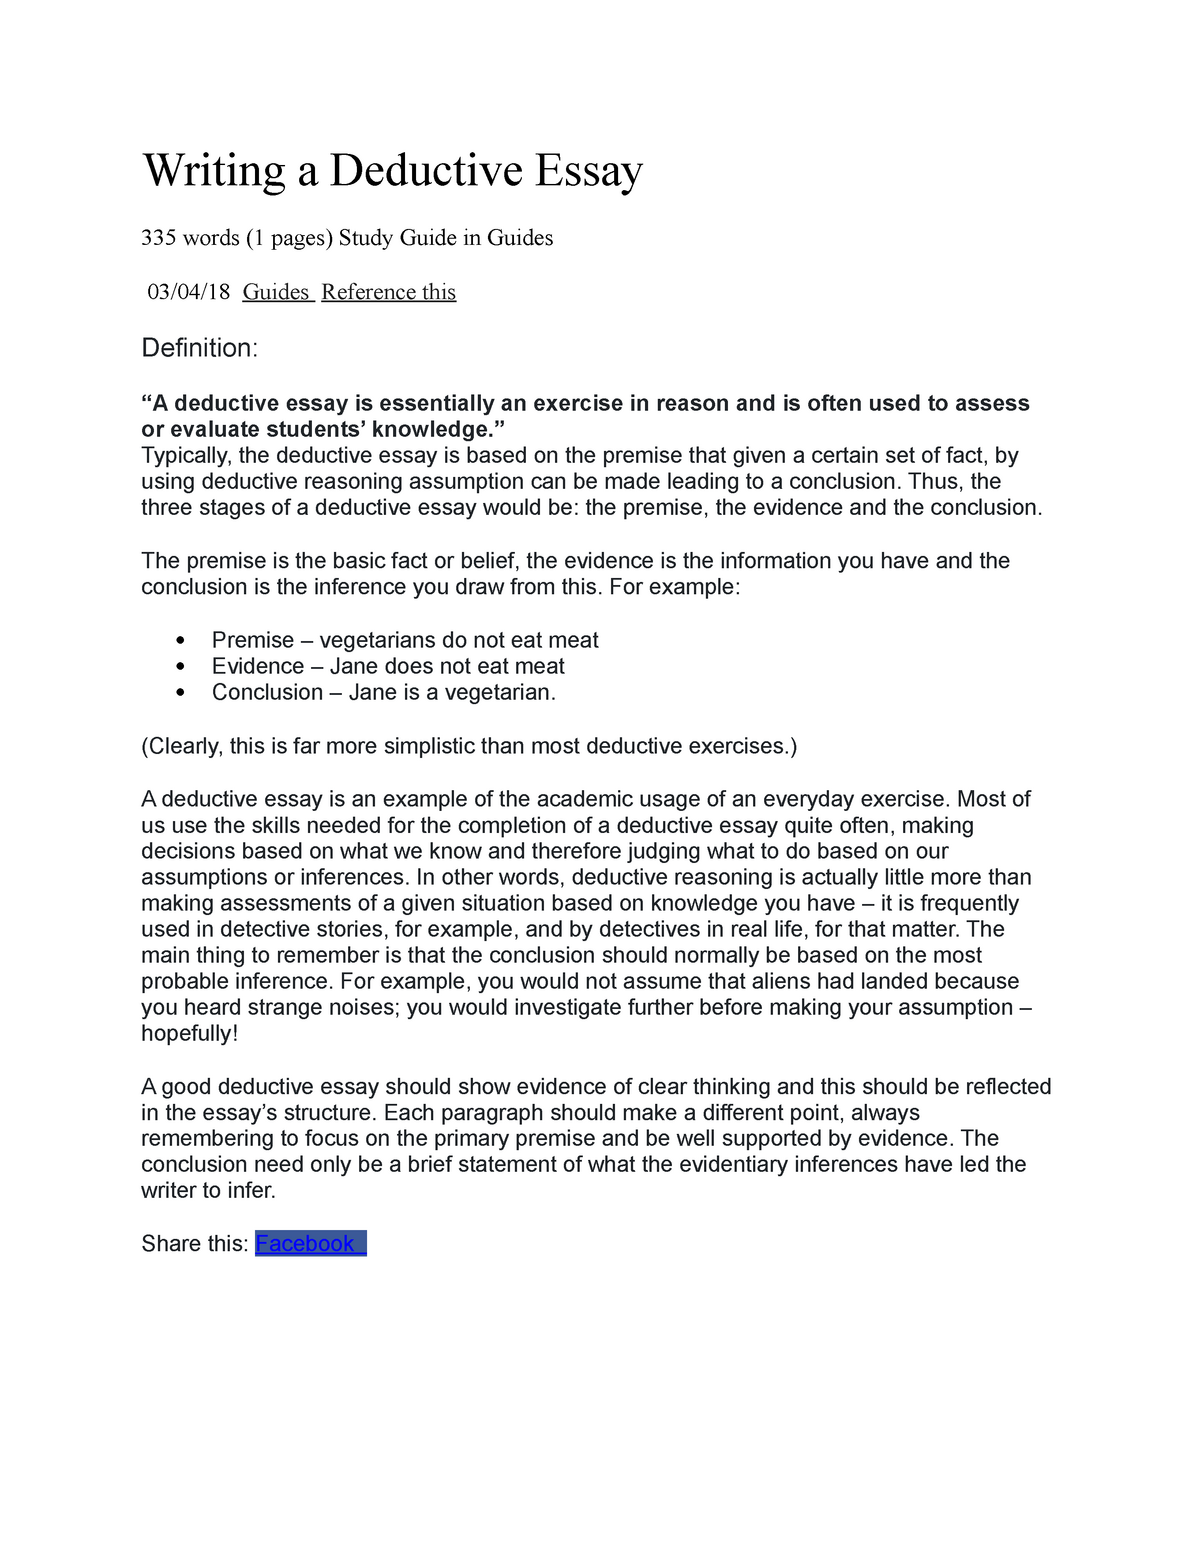 Essay writing 15 - bhaja - Writing a Deductive Essay 335 words (1 pages ...